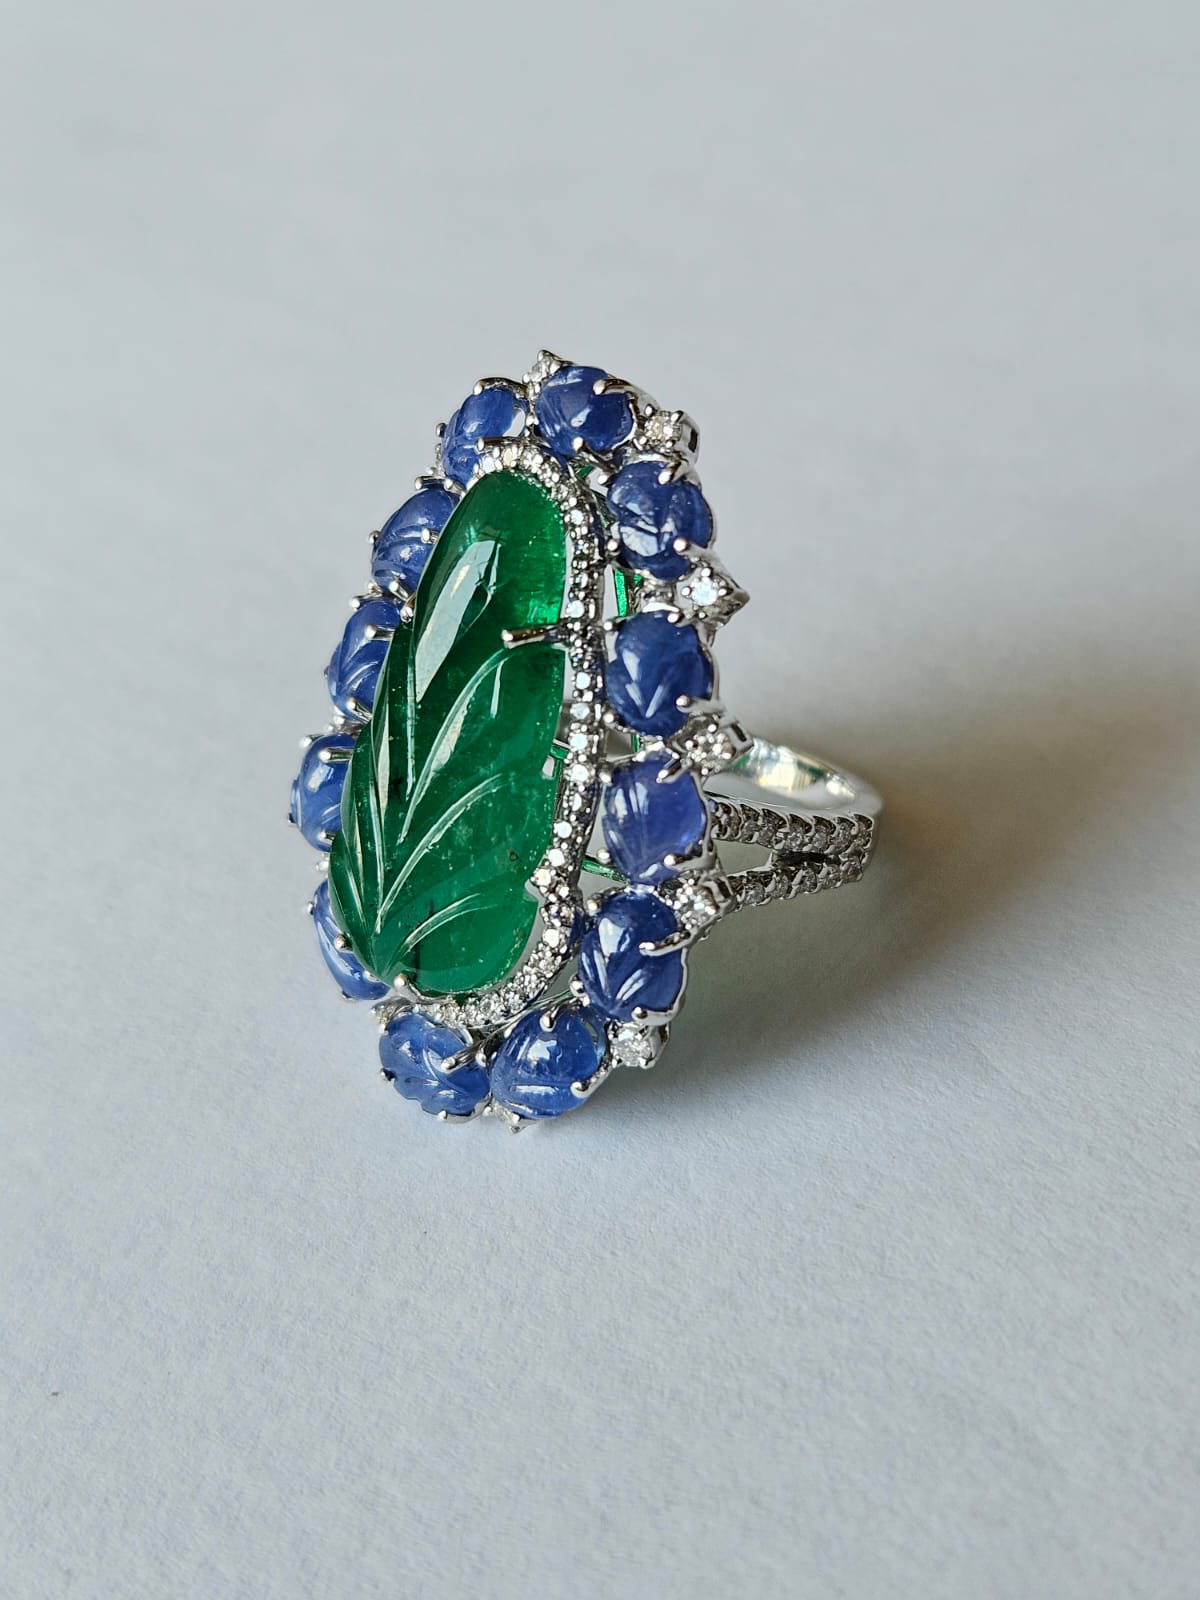 A very beautiful & gorgeous, Art deco style, Emerald & Blue Sapphire Cocktail Ring set in 18K White Gold & Diamonds. The weight of the carved Emerald is 9.83 carats. The Emerald is completely natural, without any treatment and is of Zambian origin.